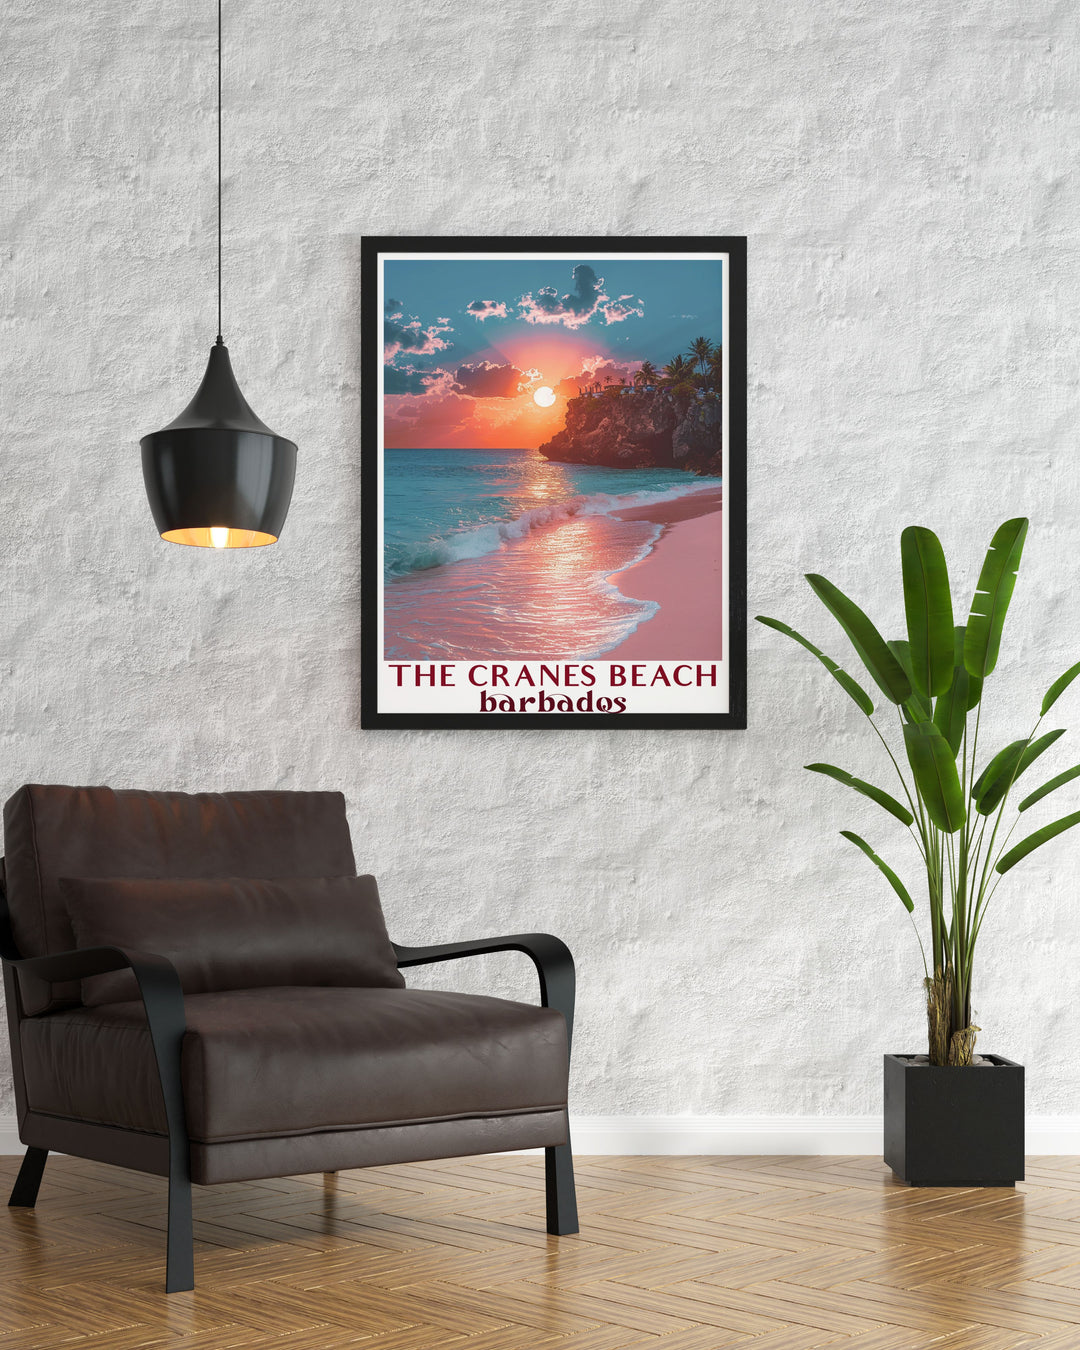 Vintage Caribbean poster evoking the timeless charm and rich colors of the islands, perfect for adding a nostalgic touch to your decor and inspiring wanderlust.